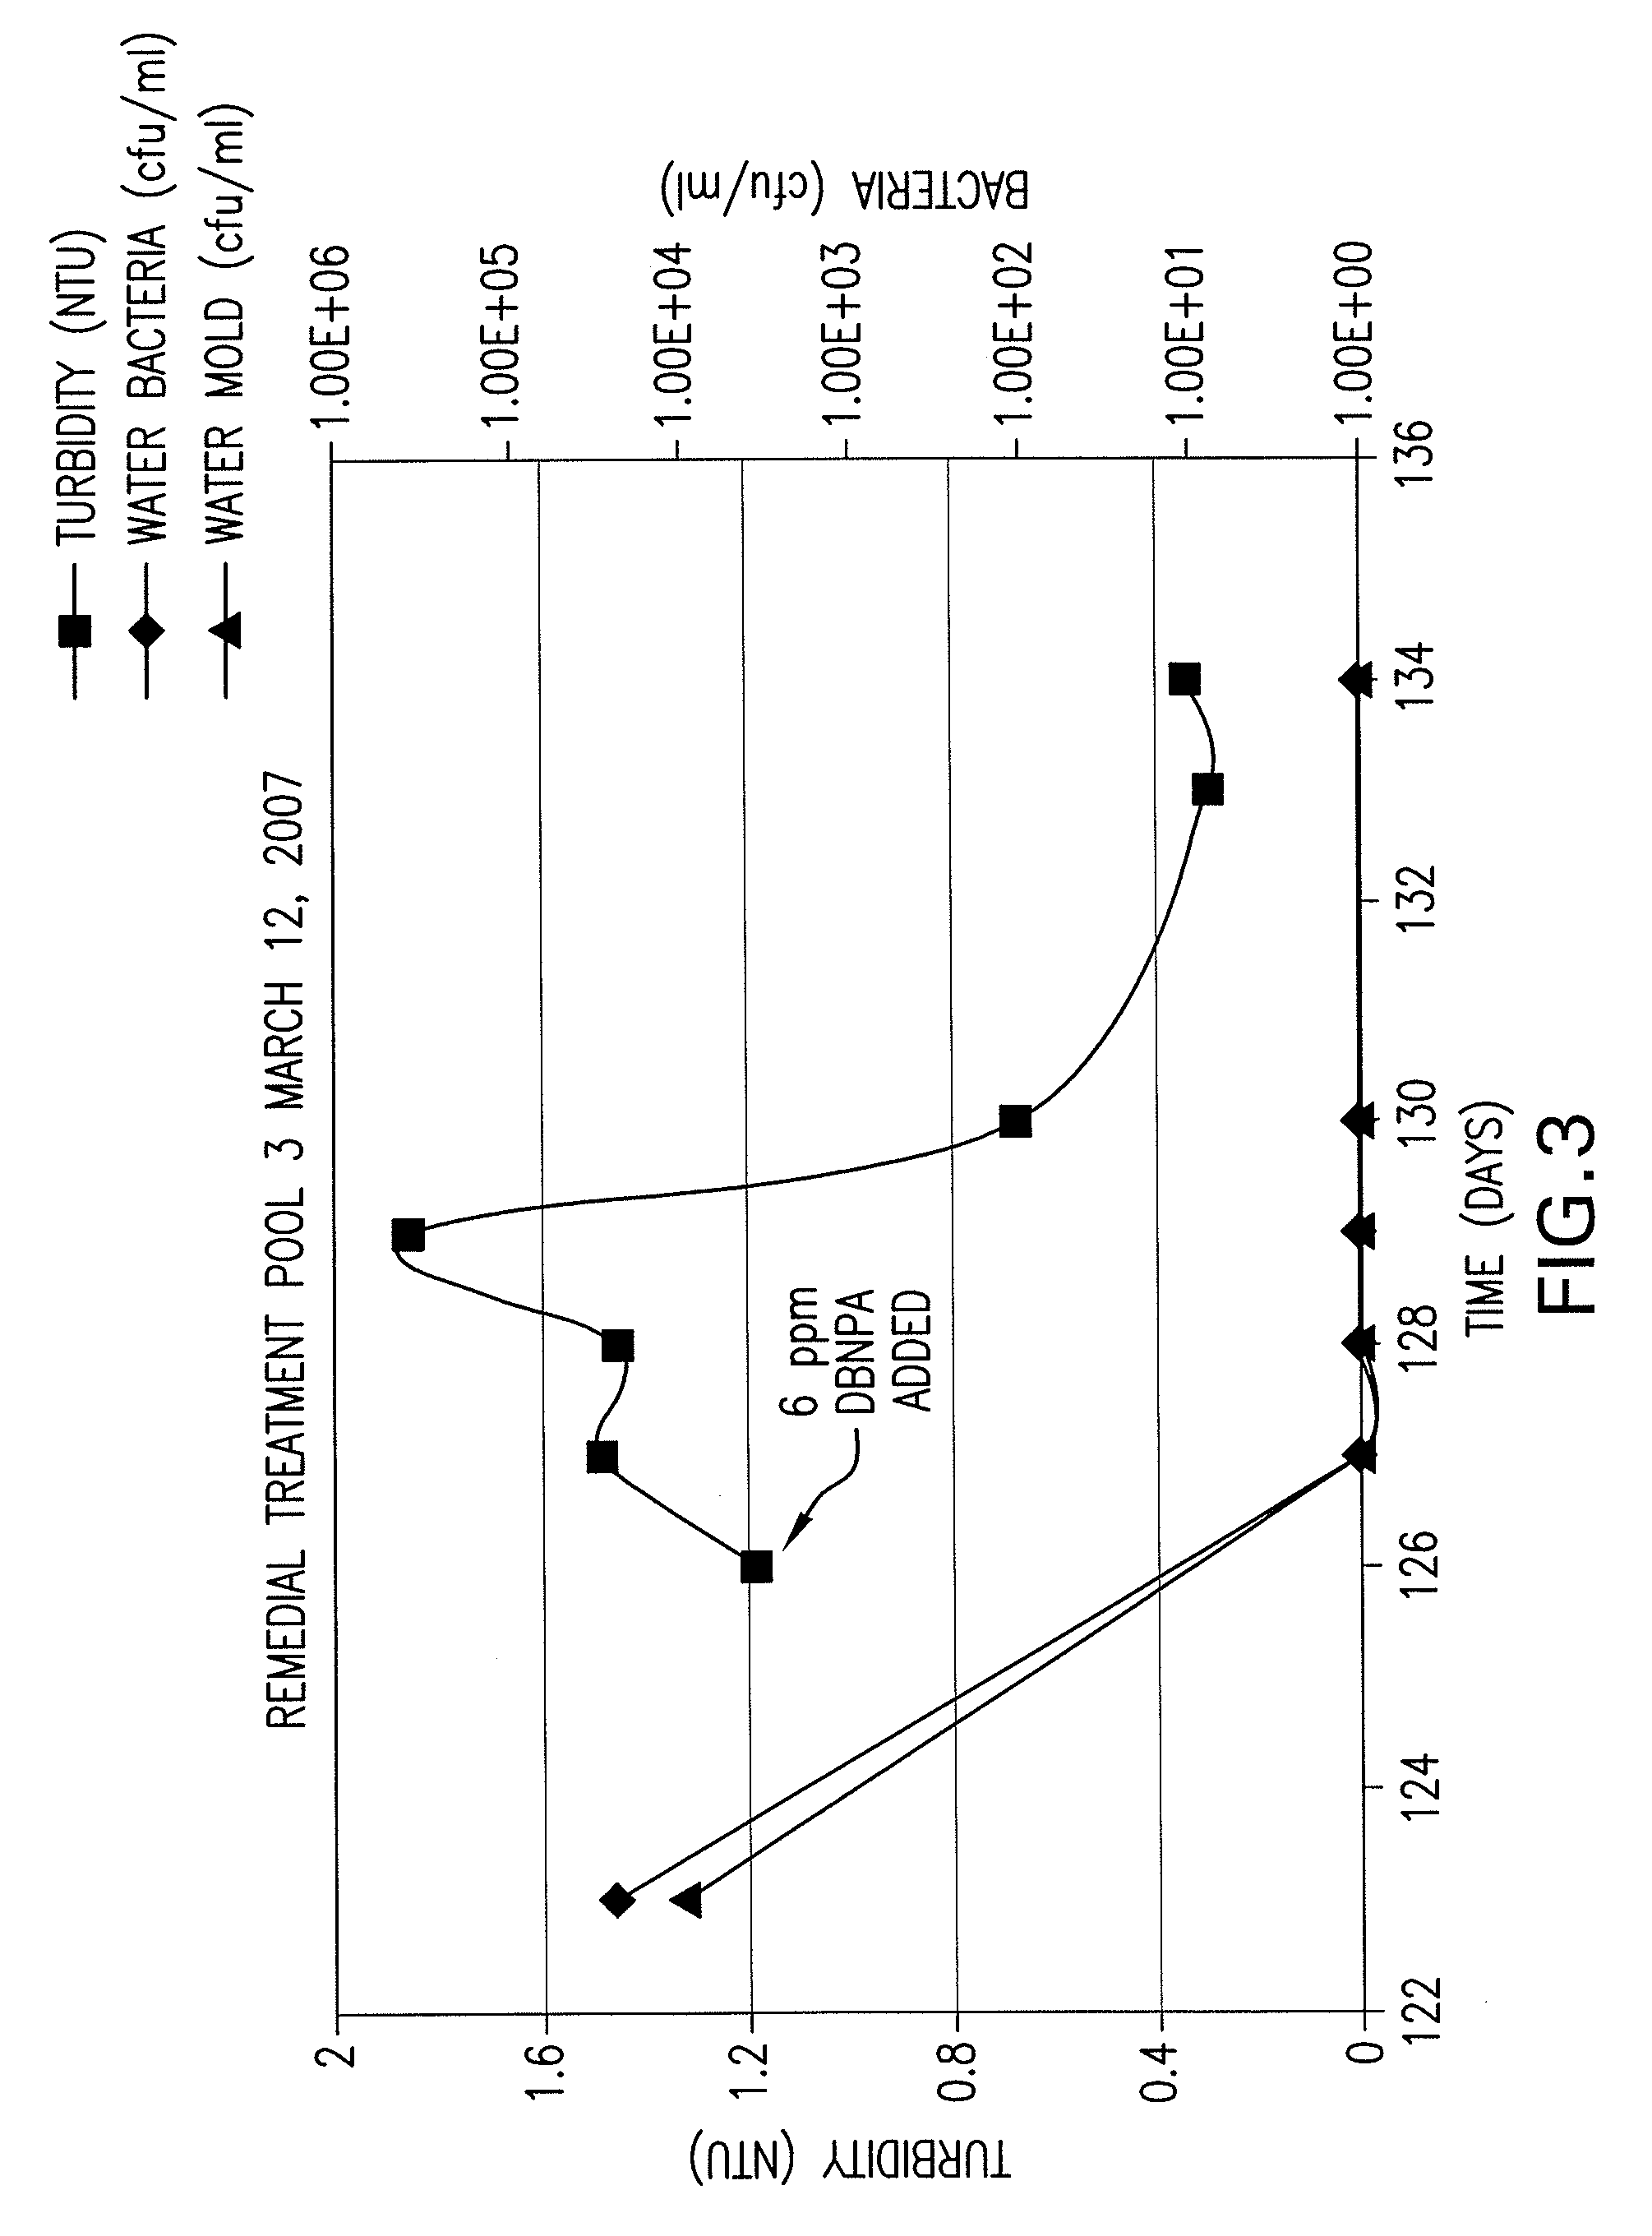 Biocidal composition and method for treating recirculating water systems